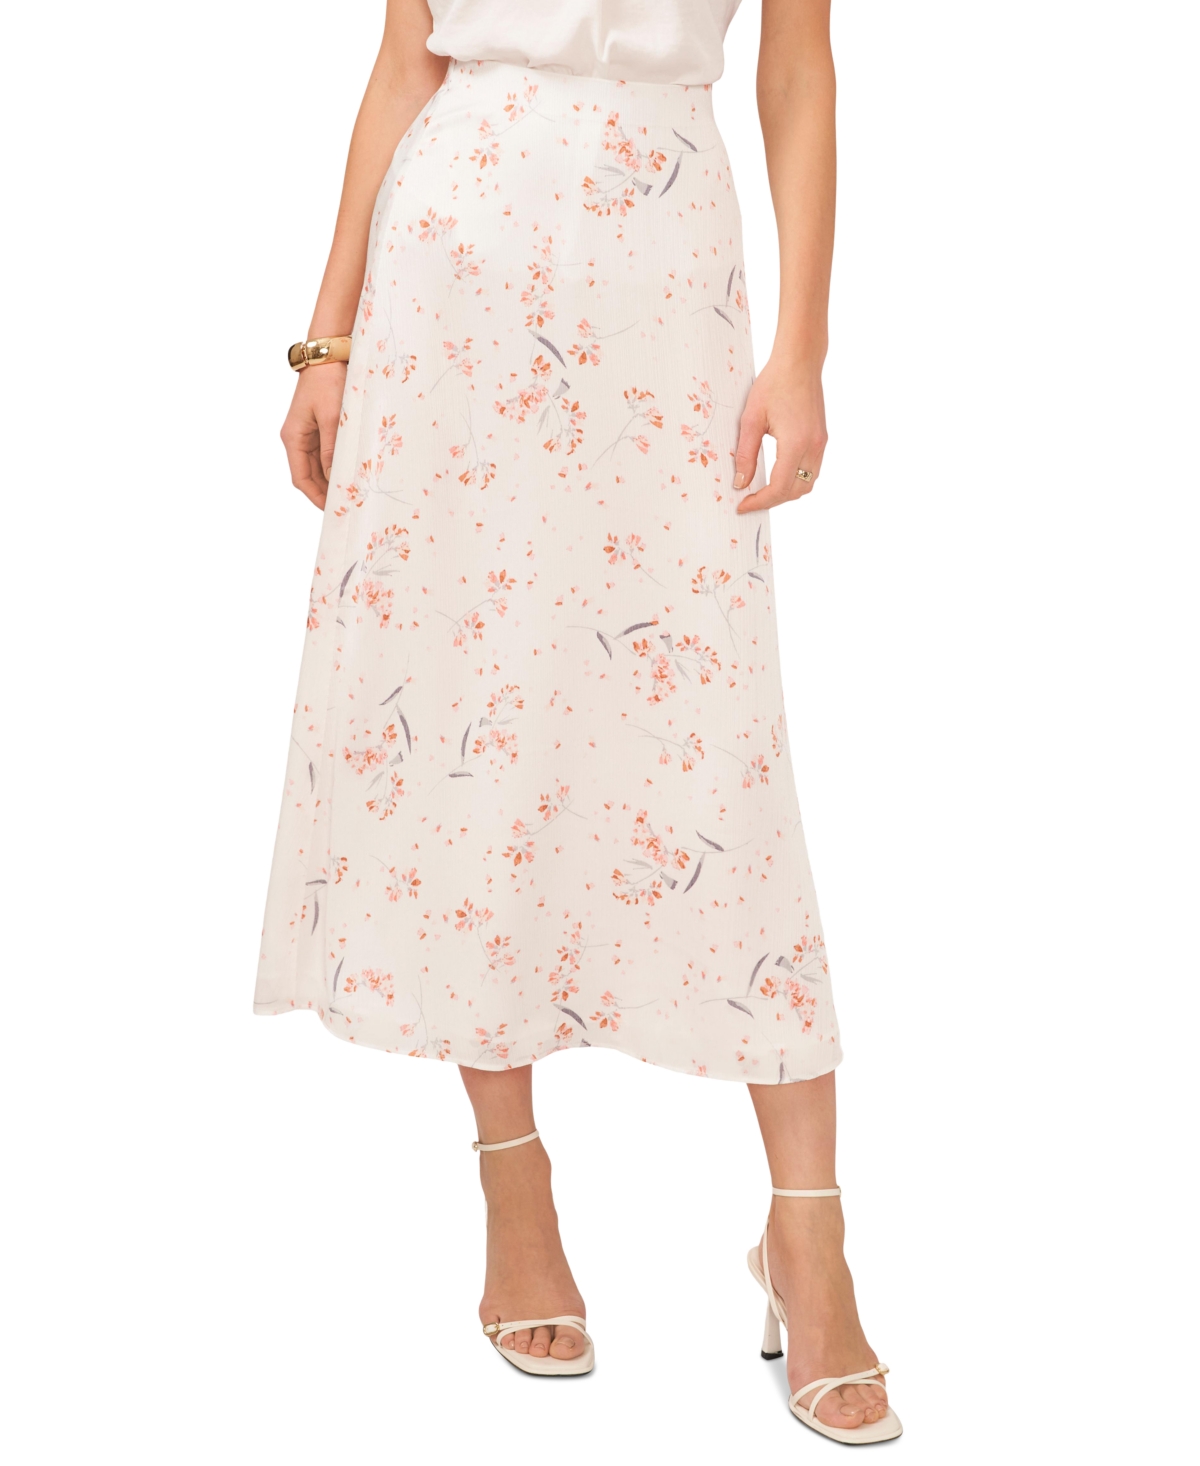 Women's Pull-On Floral Print Maxi Skirt - New Ivory